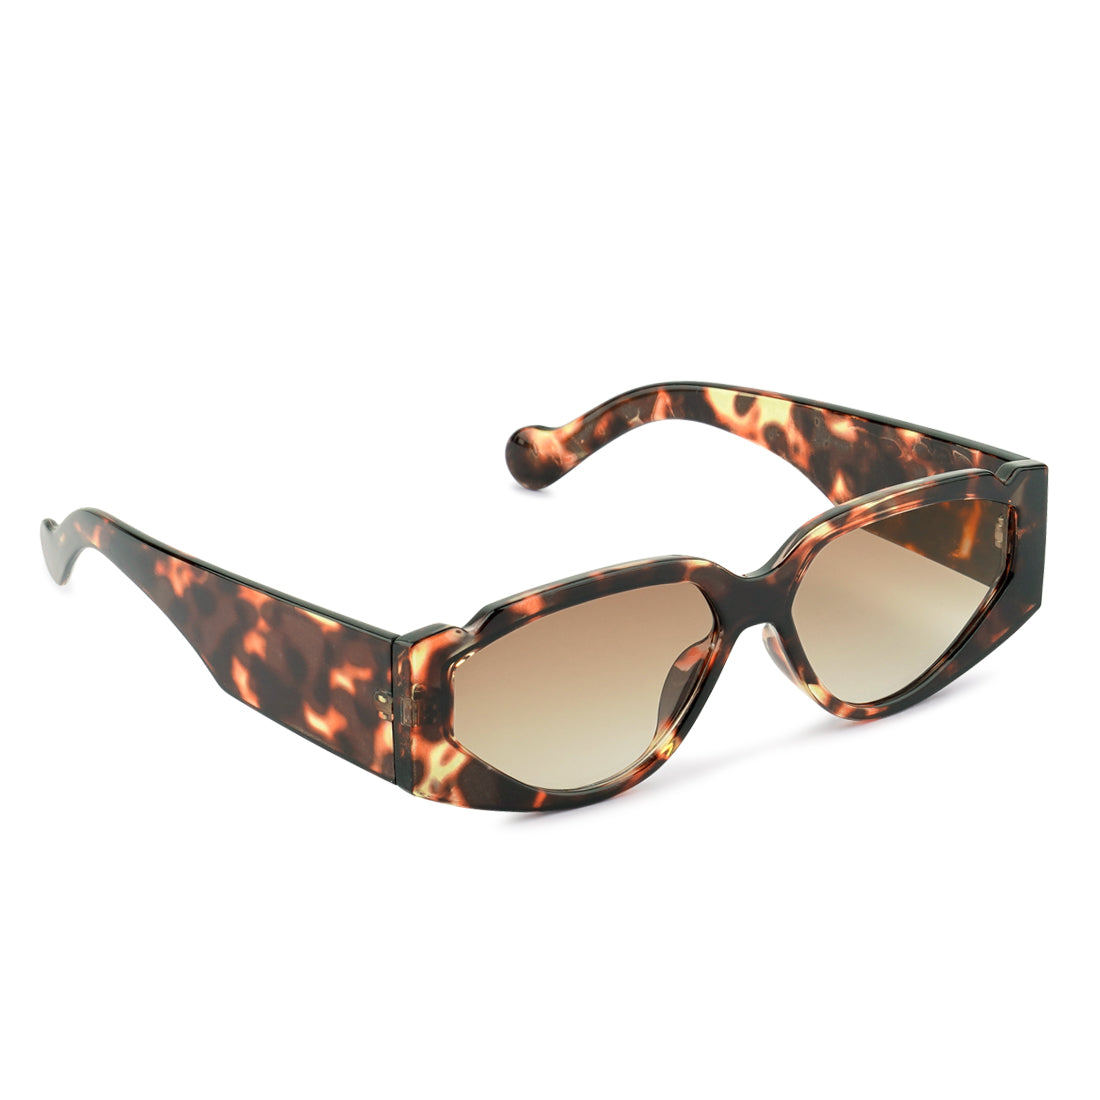 Sport Sunglasses With Printed Temples